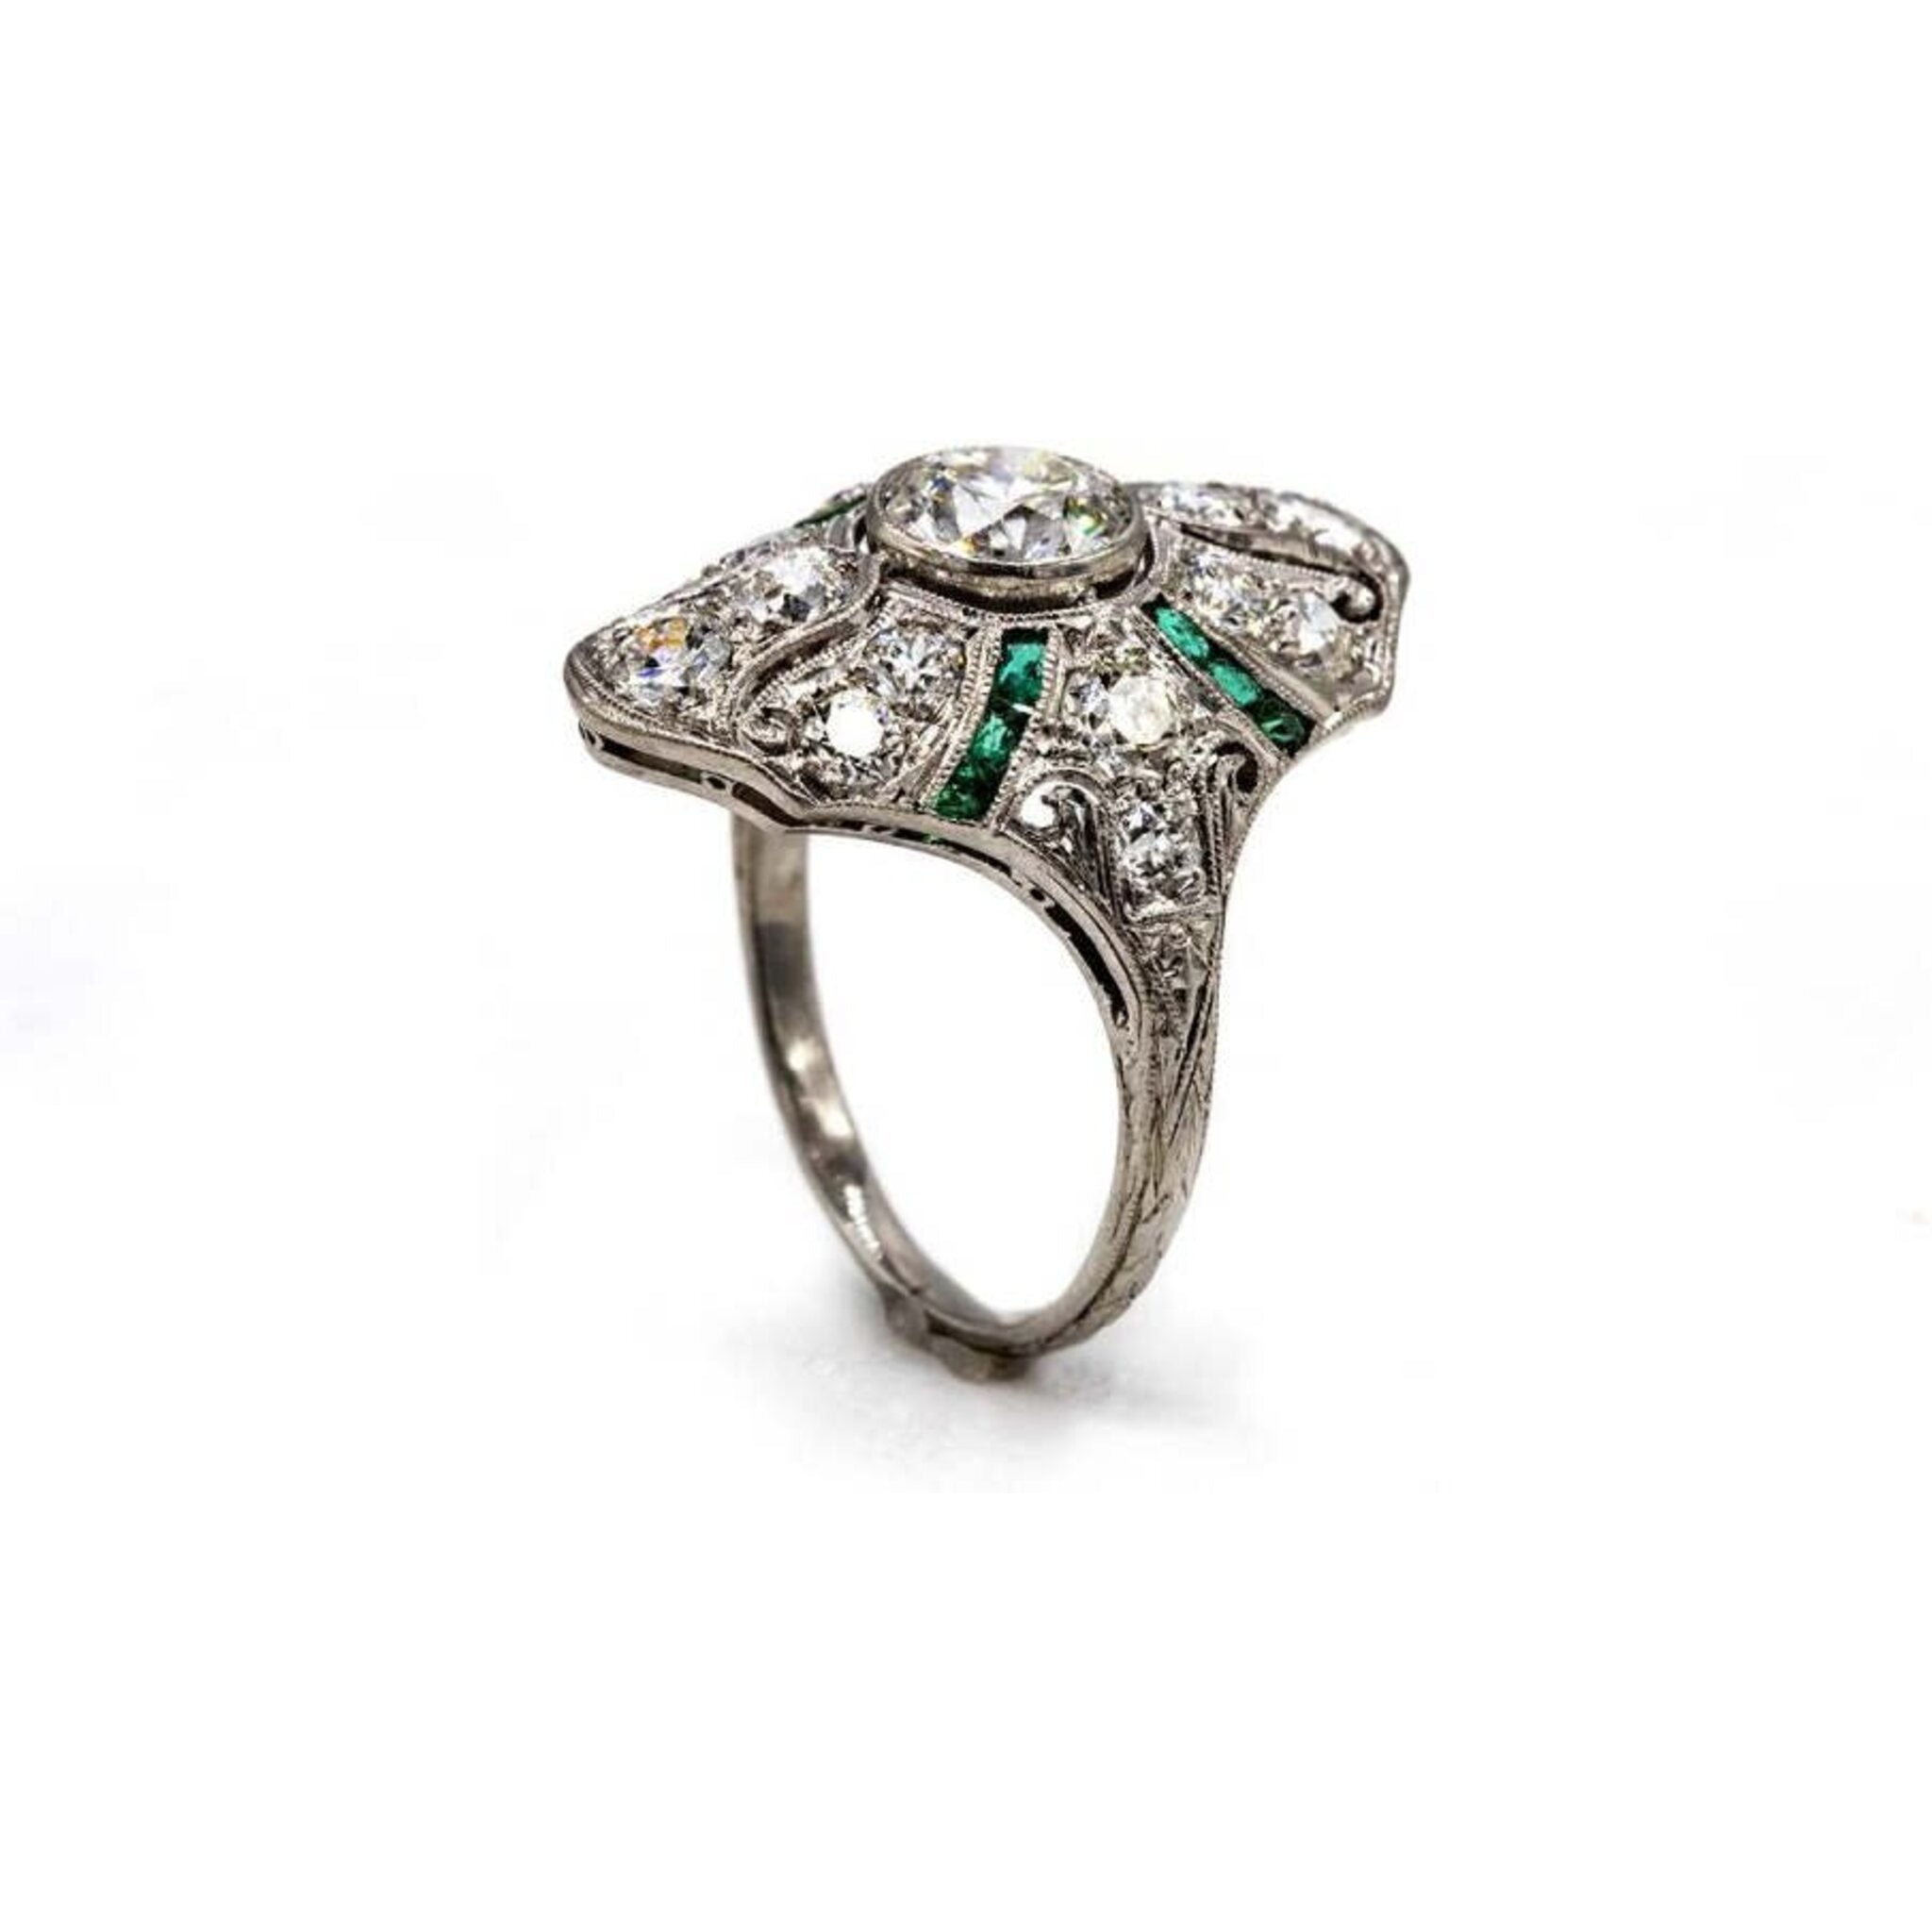 Buy Antique Edwardian Diamond Solitaire Ring 1.46ct Diamond Circa 1910  Online in India - Etsy